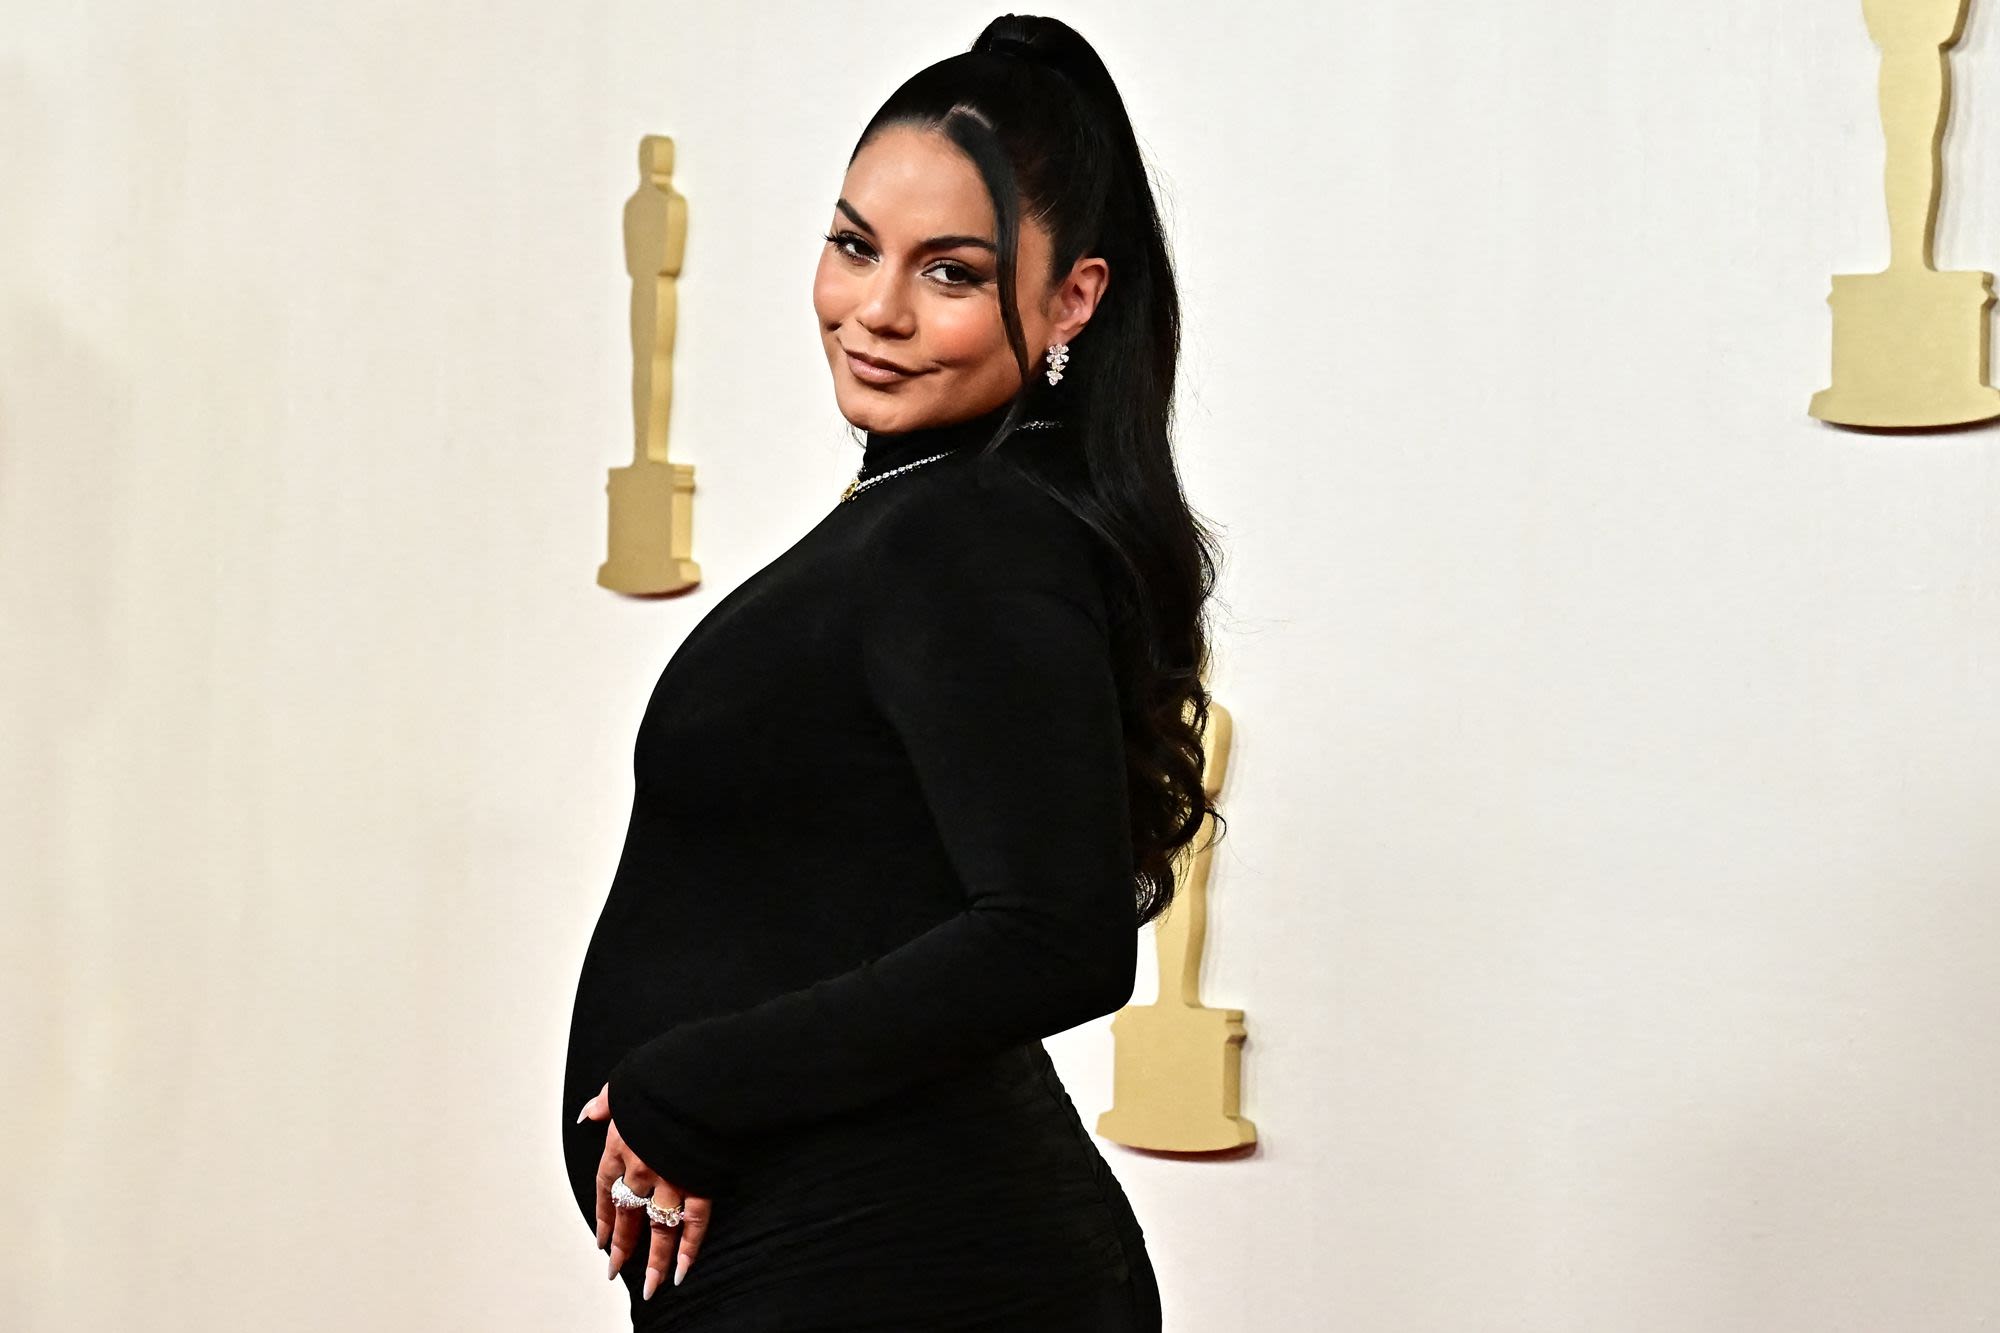 Pregnant Vanessa Hudgens Reveals If She Wants Her Future Kids to Watch Her Work